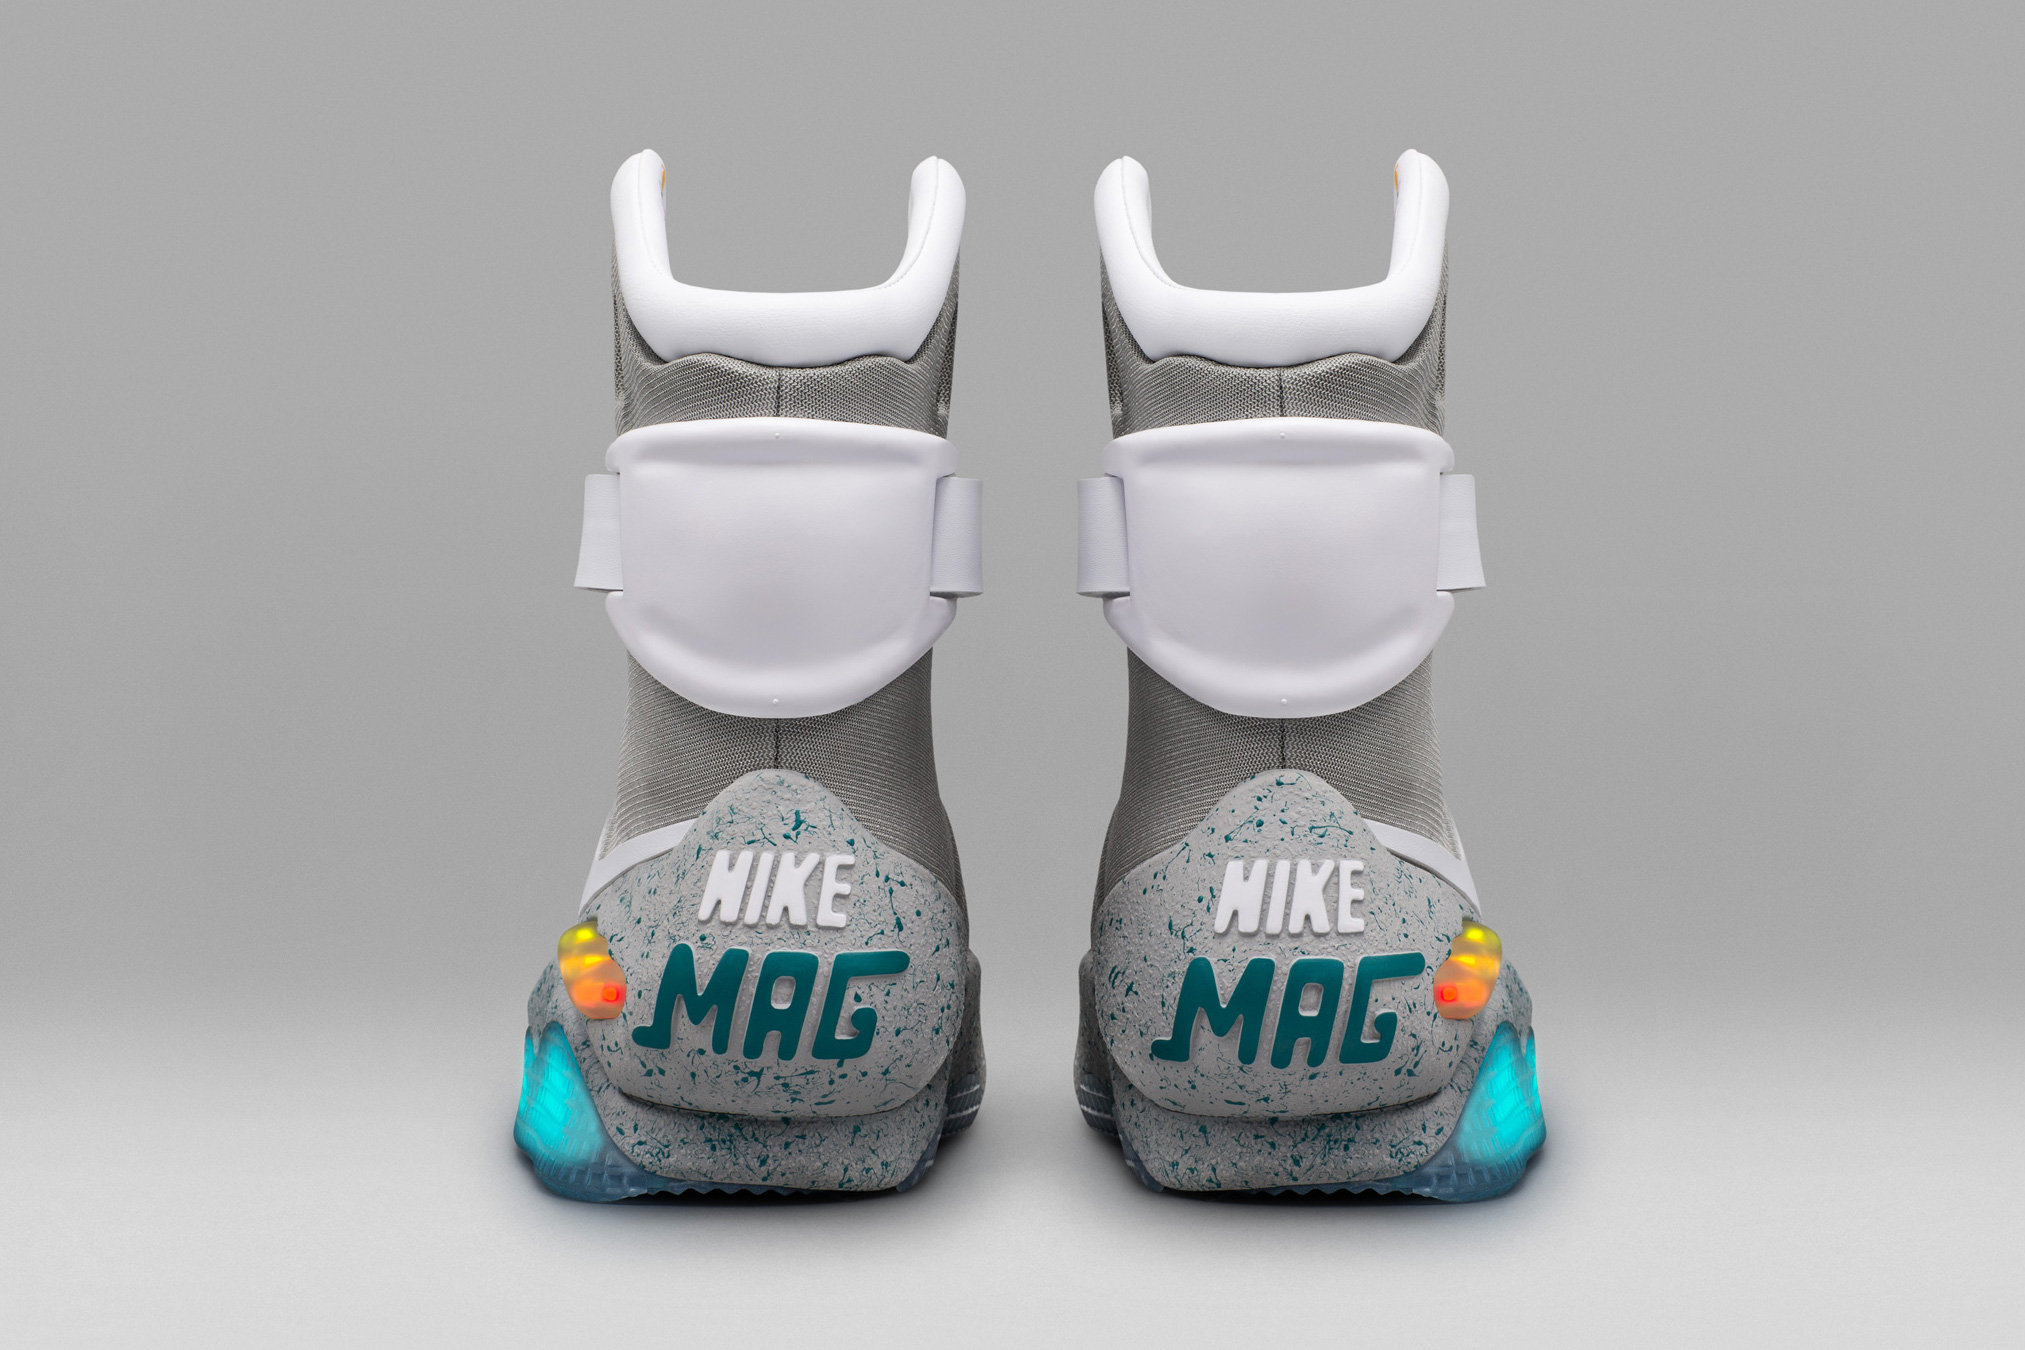 Buy nike mags for kids \u003e up to 41 